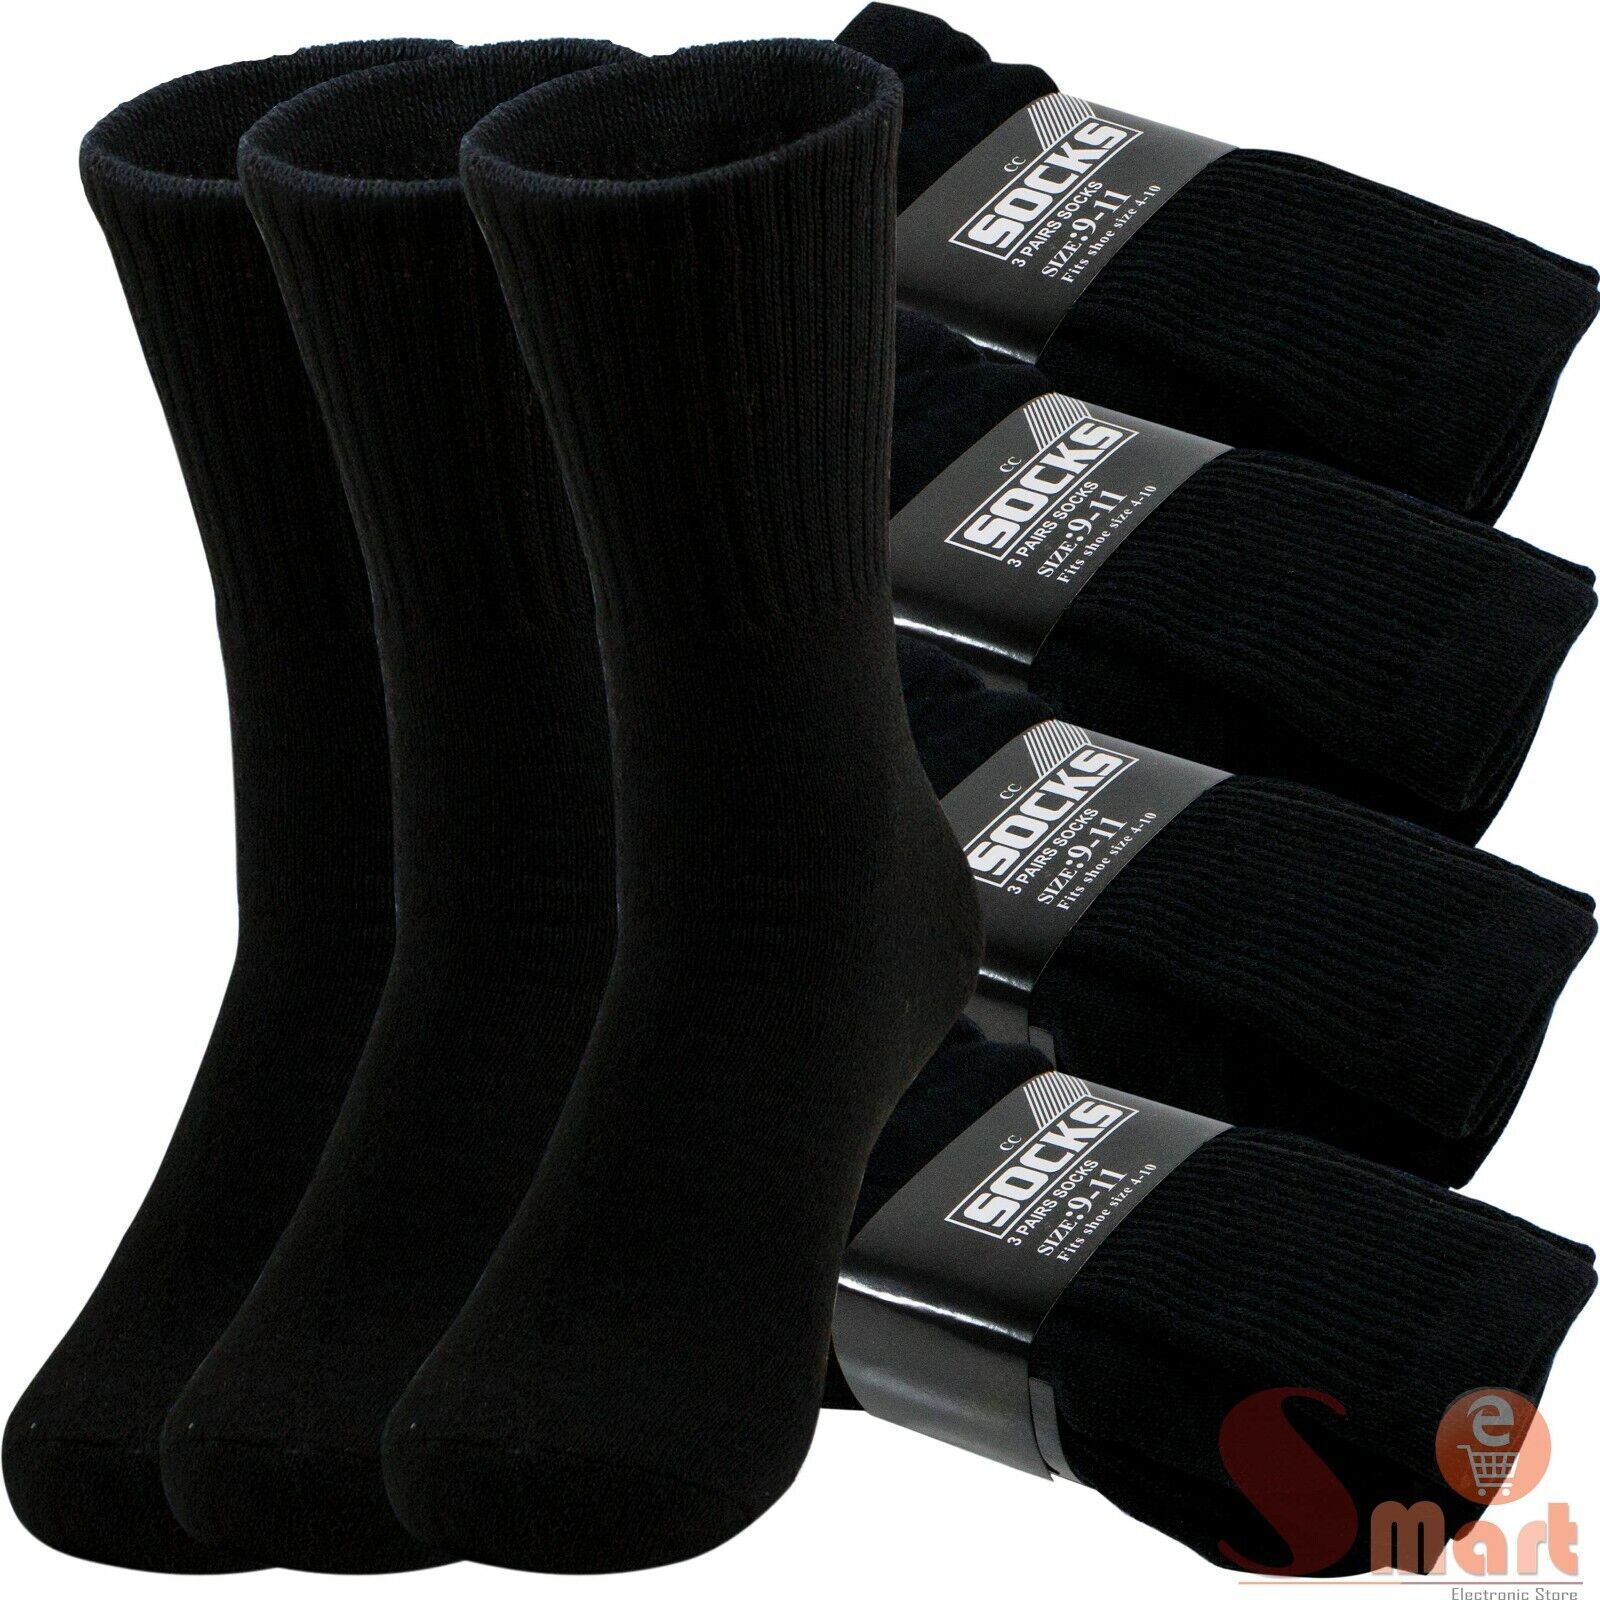 Lot 3-12 Pairs Mens Solid Sports Athletic Work Plain Crew Socks Size 9-11 10-13